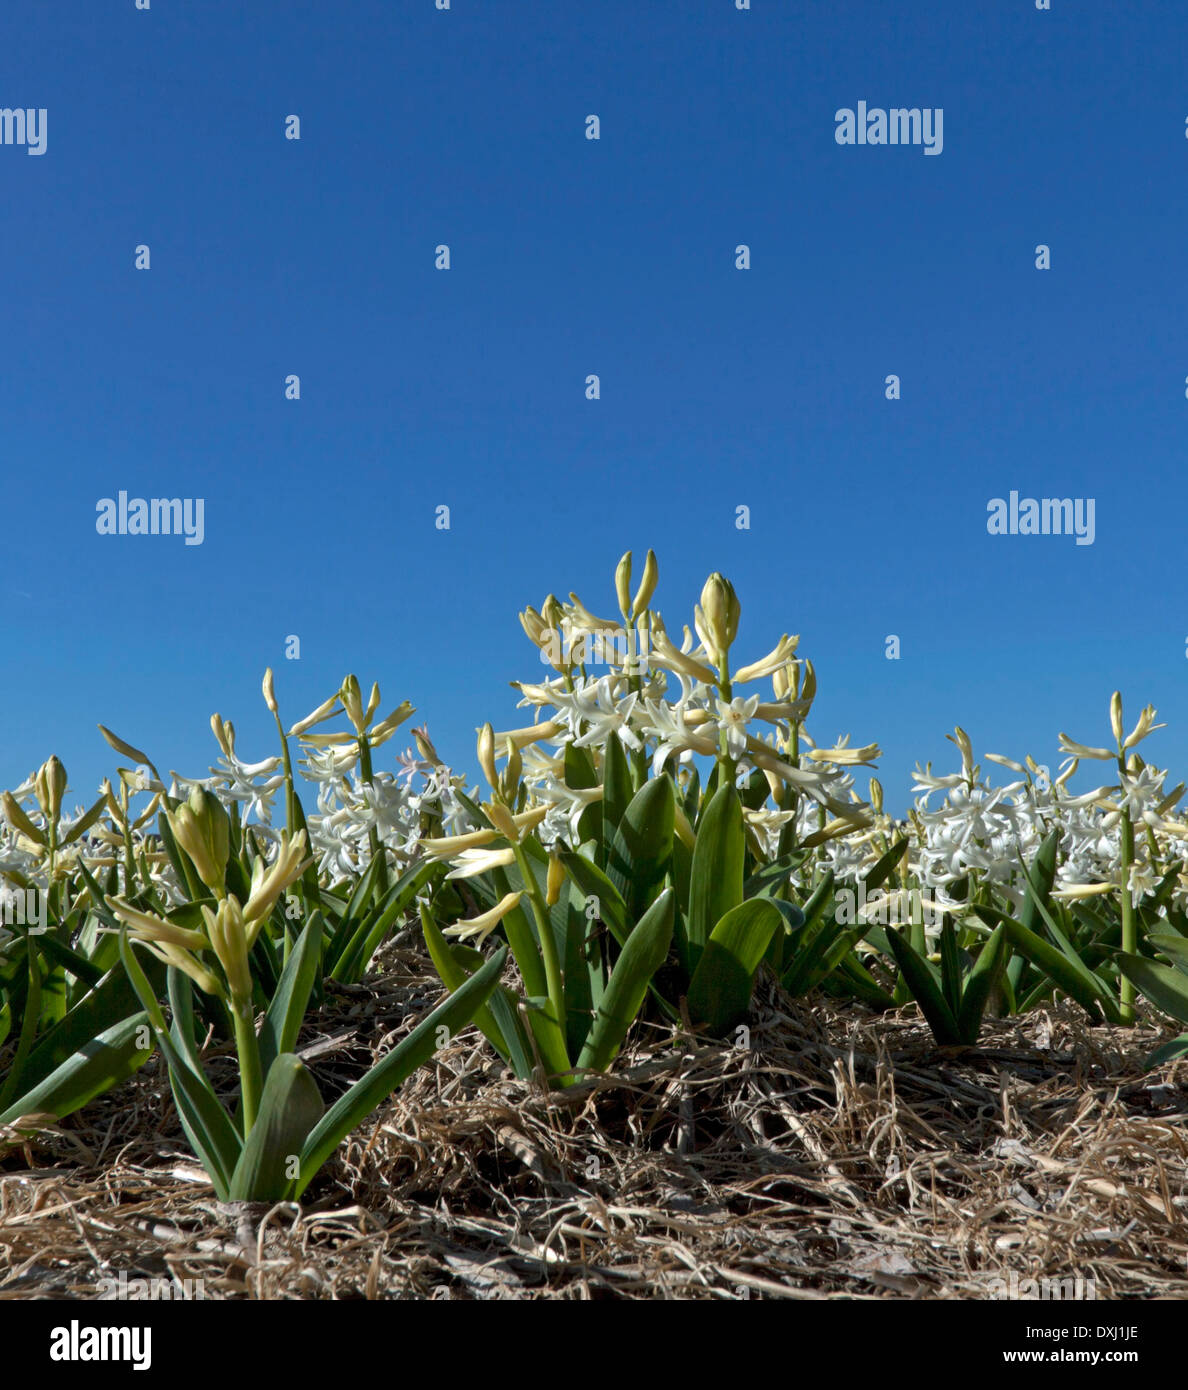 Bulb fields in spring: Low angle view of flowering white hyacinths, Noordwijkerhout, South Holland, The Netherlands. Stock Photo